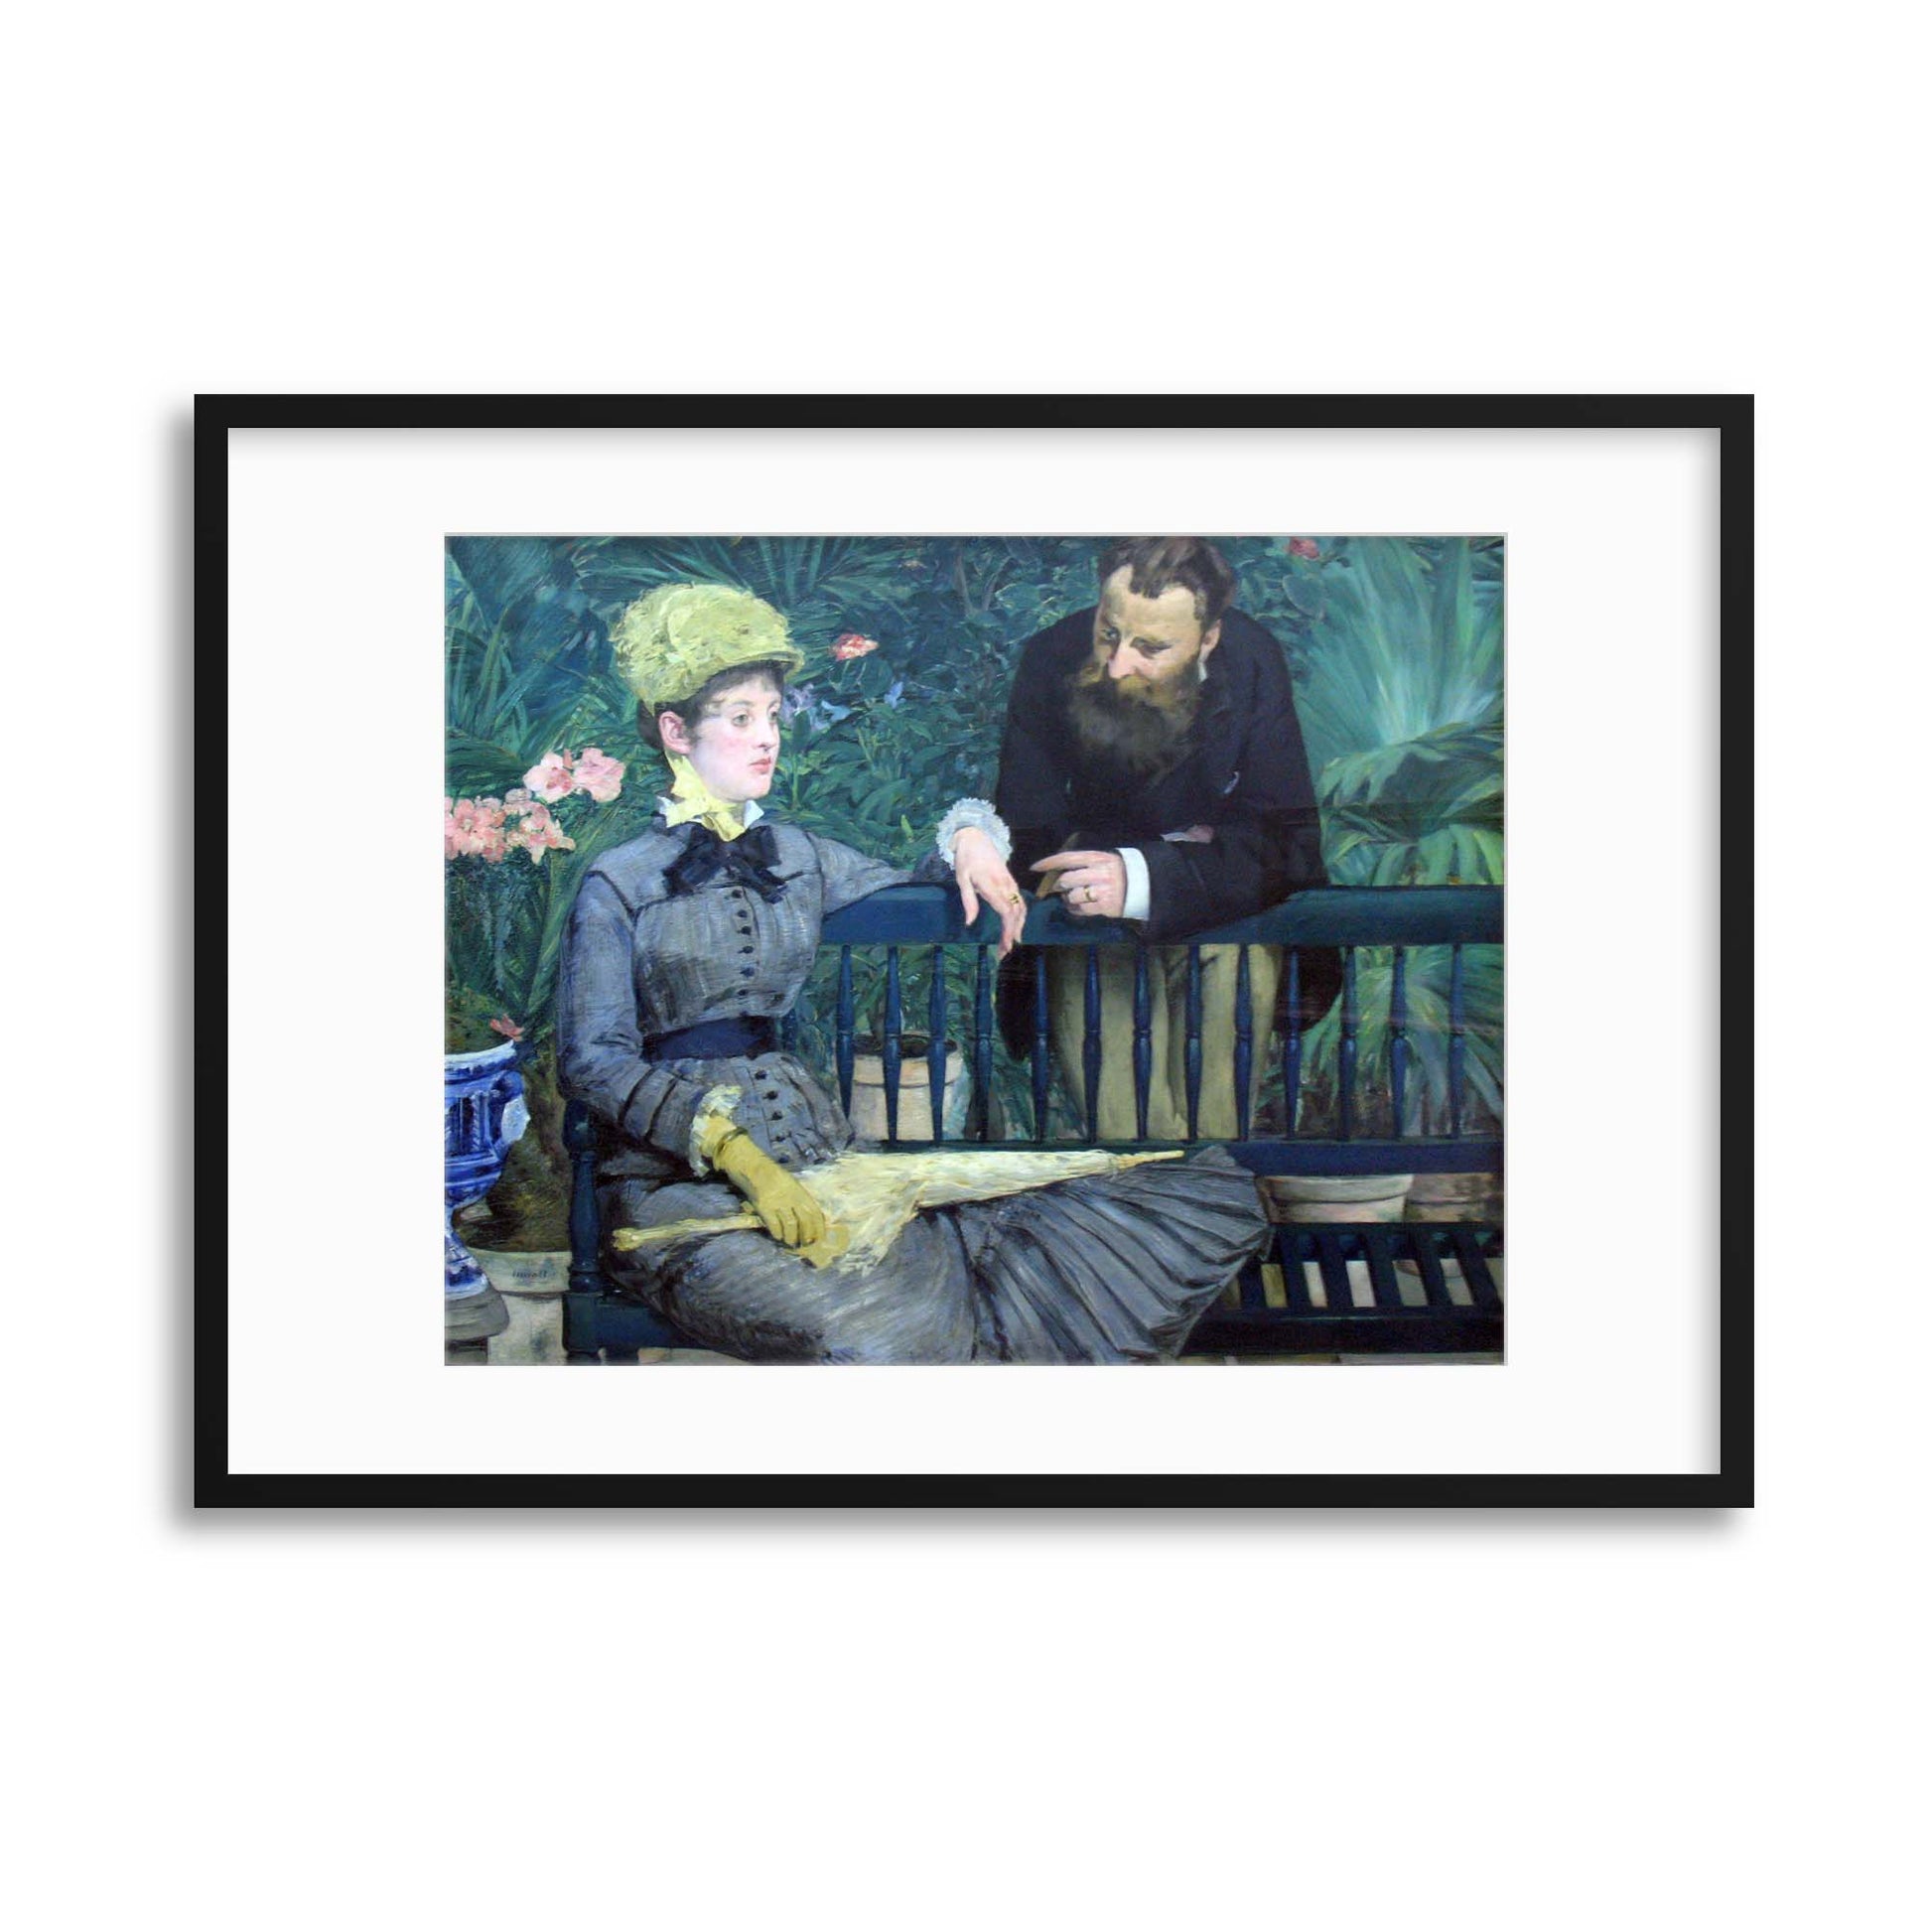 Eacute douard Manet, & quot; In the Conservatory & quot; Framed Print - USTAD HOME